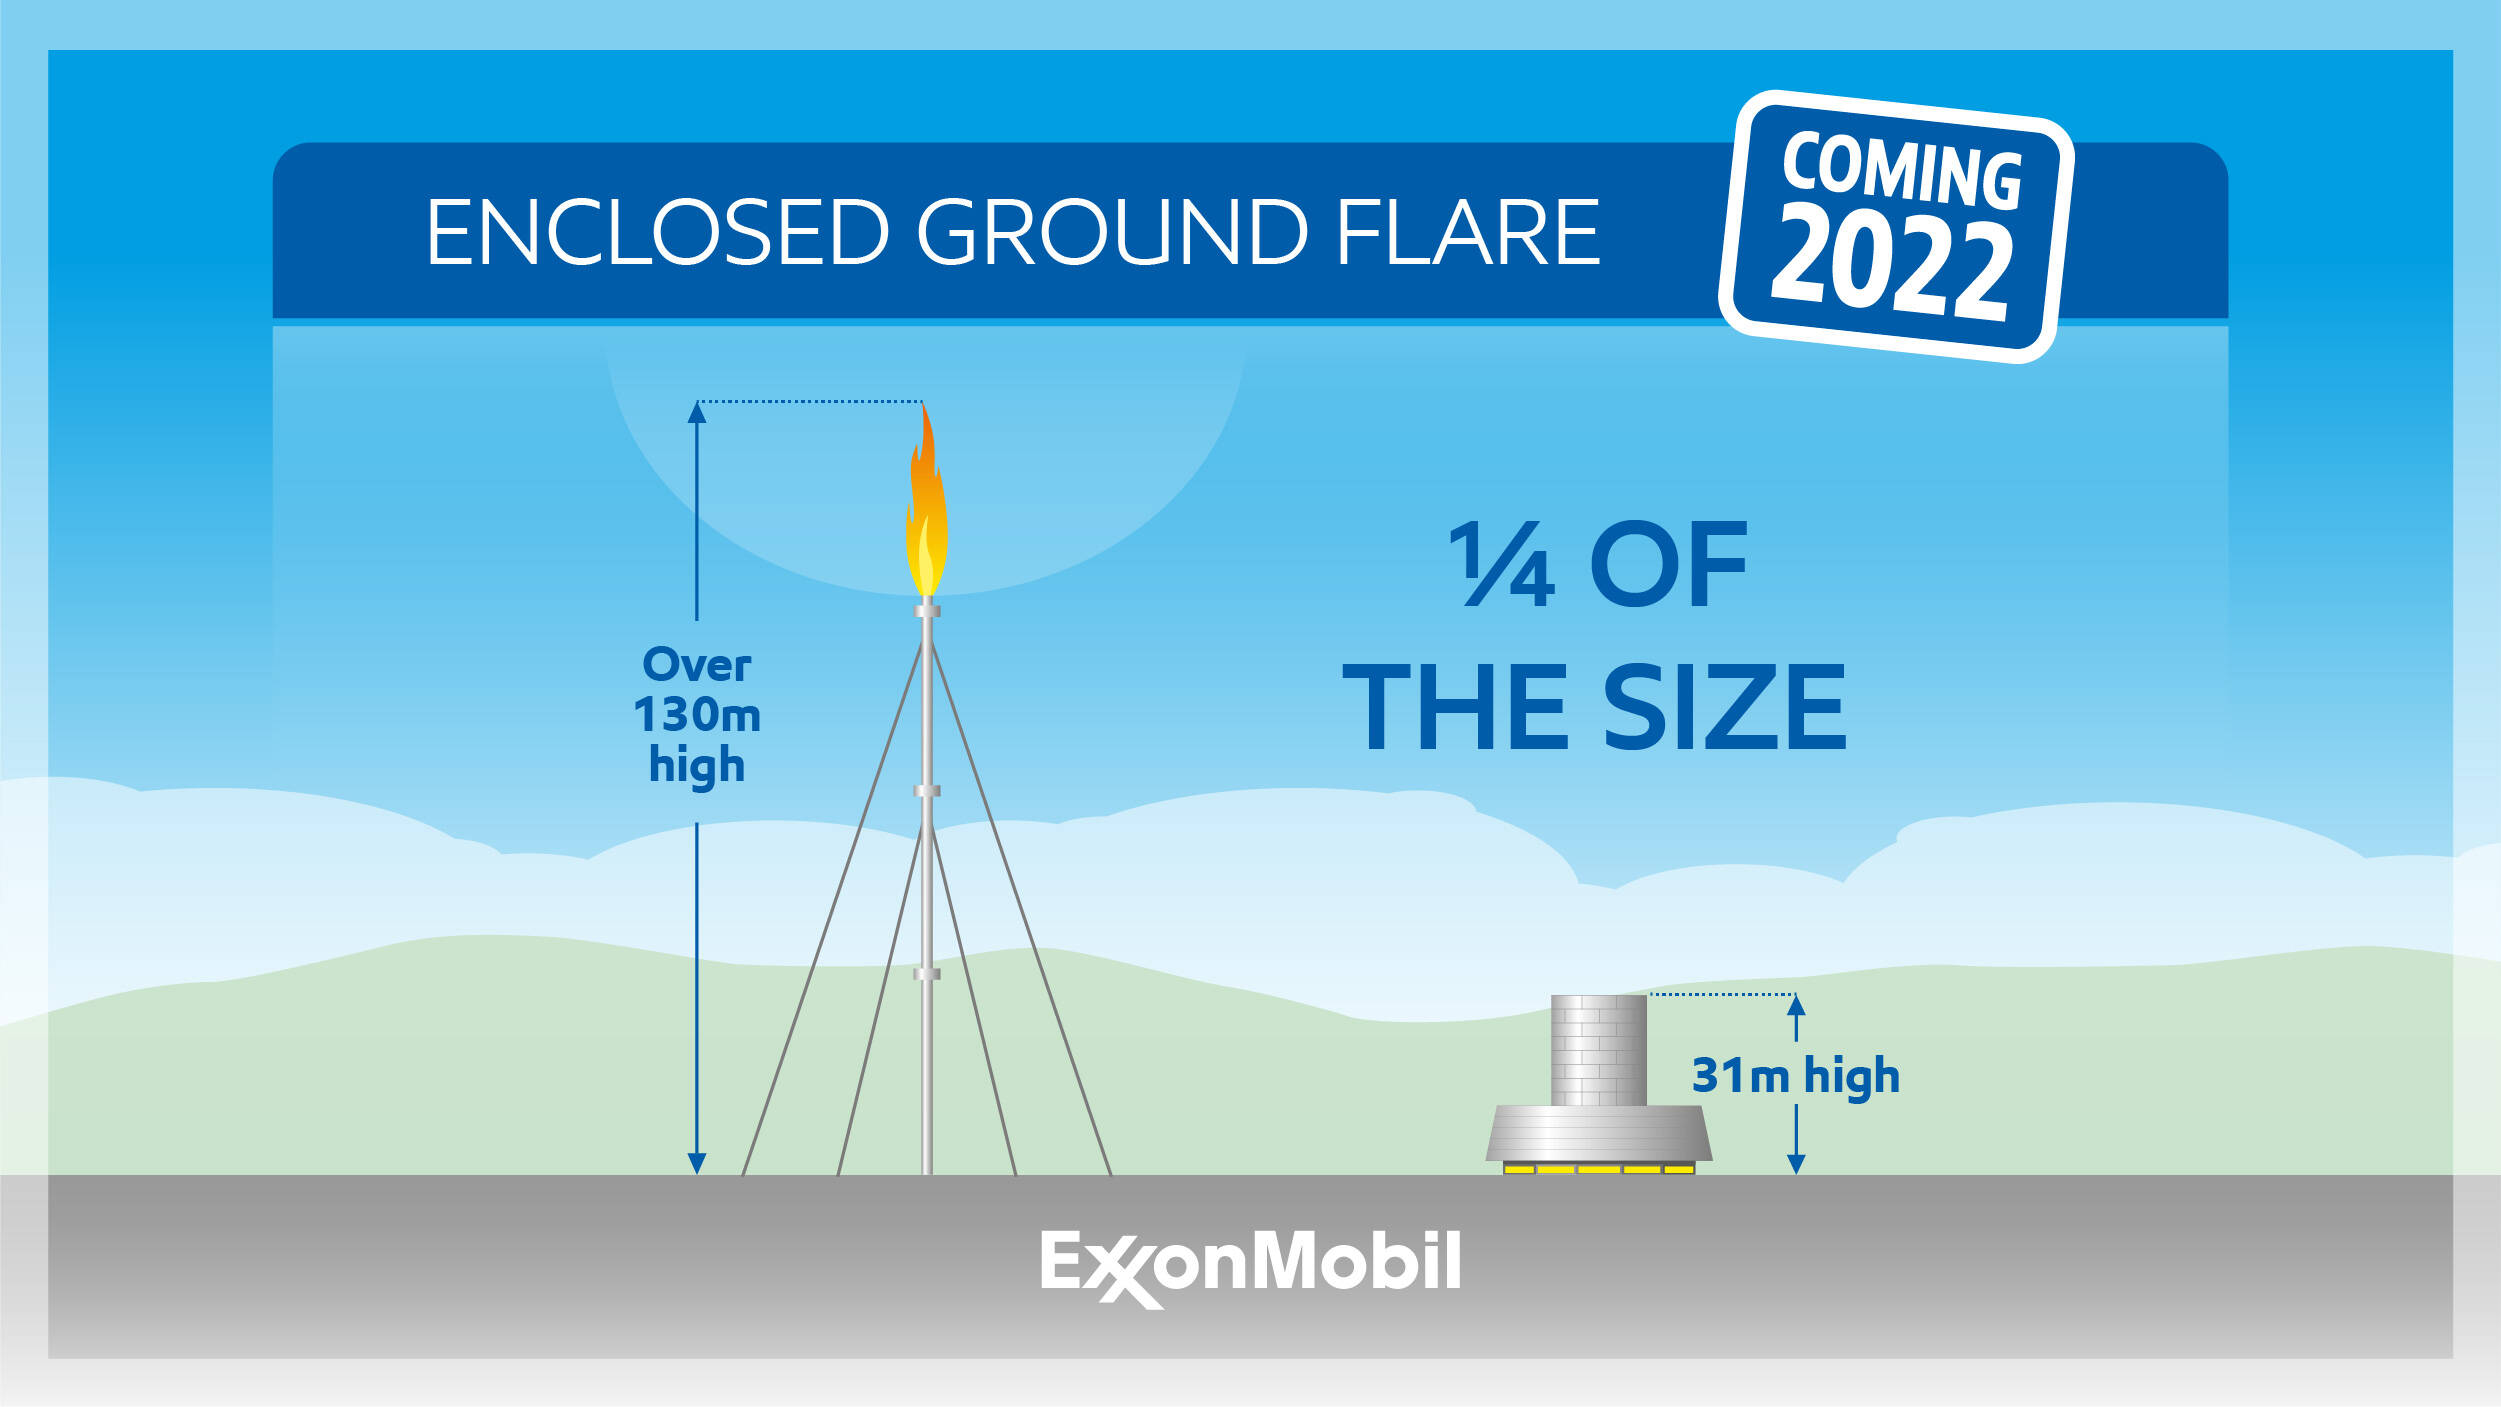 Our EGF won't be easily visible from surrounding communities.
At just 31m tall it measures less than a quarter of the height of the current elevated flare.